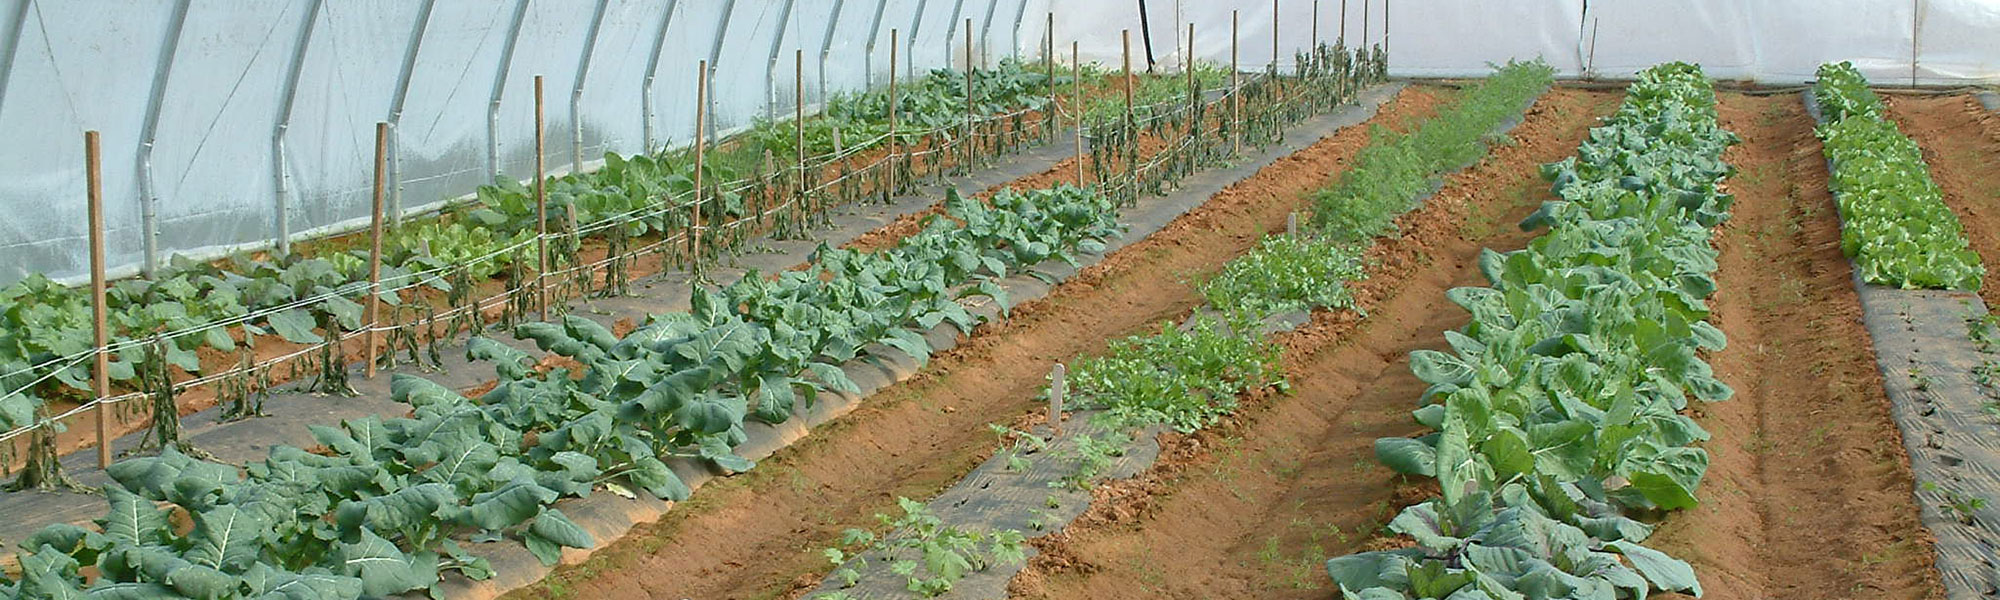 vegetables growing in a high tunnel